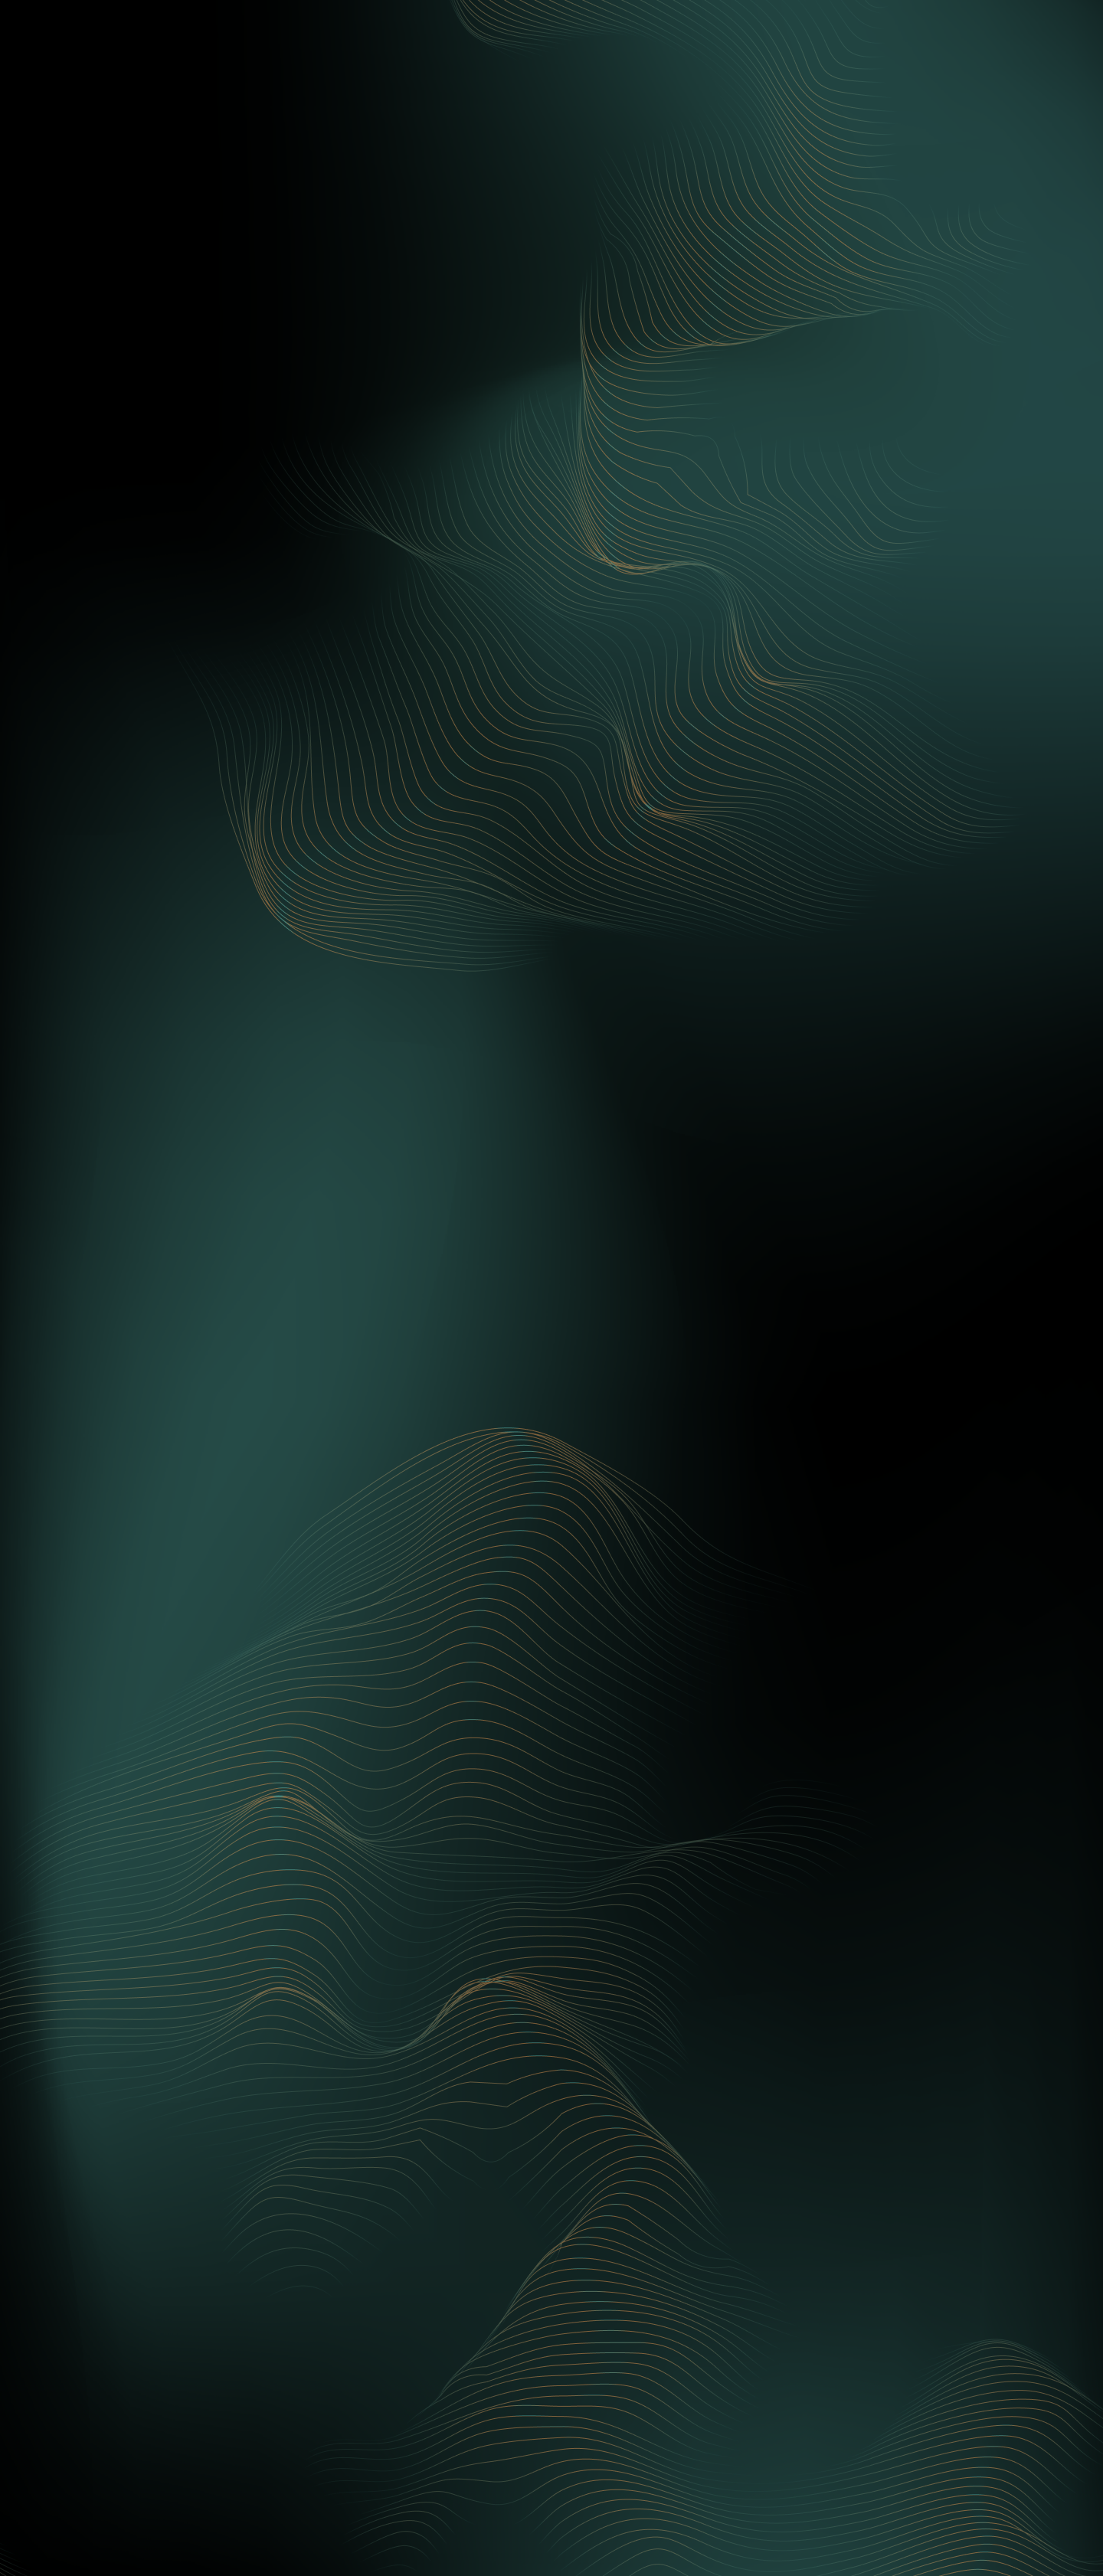 abstract green and black background